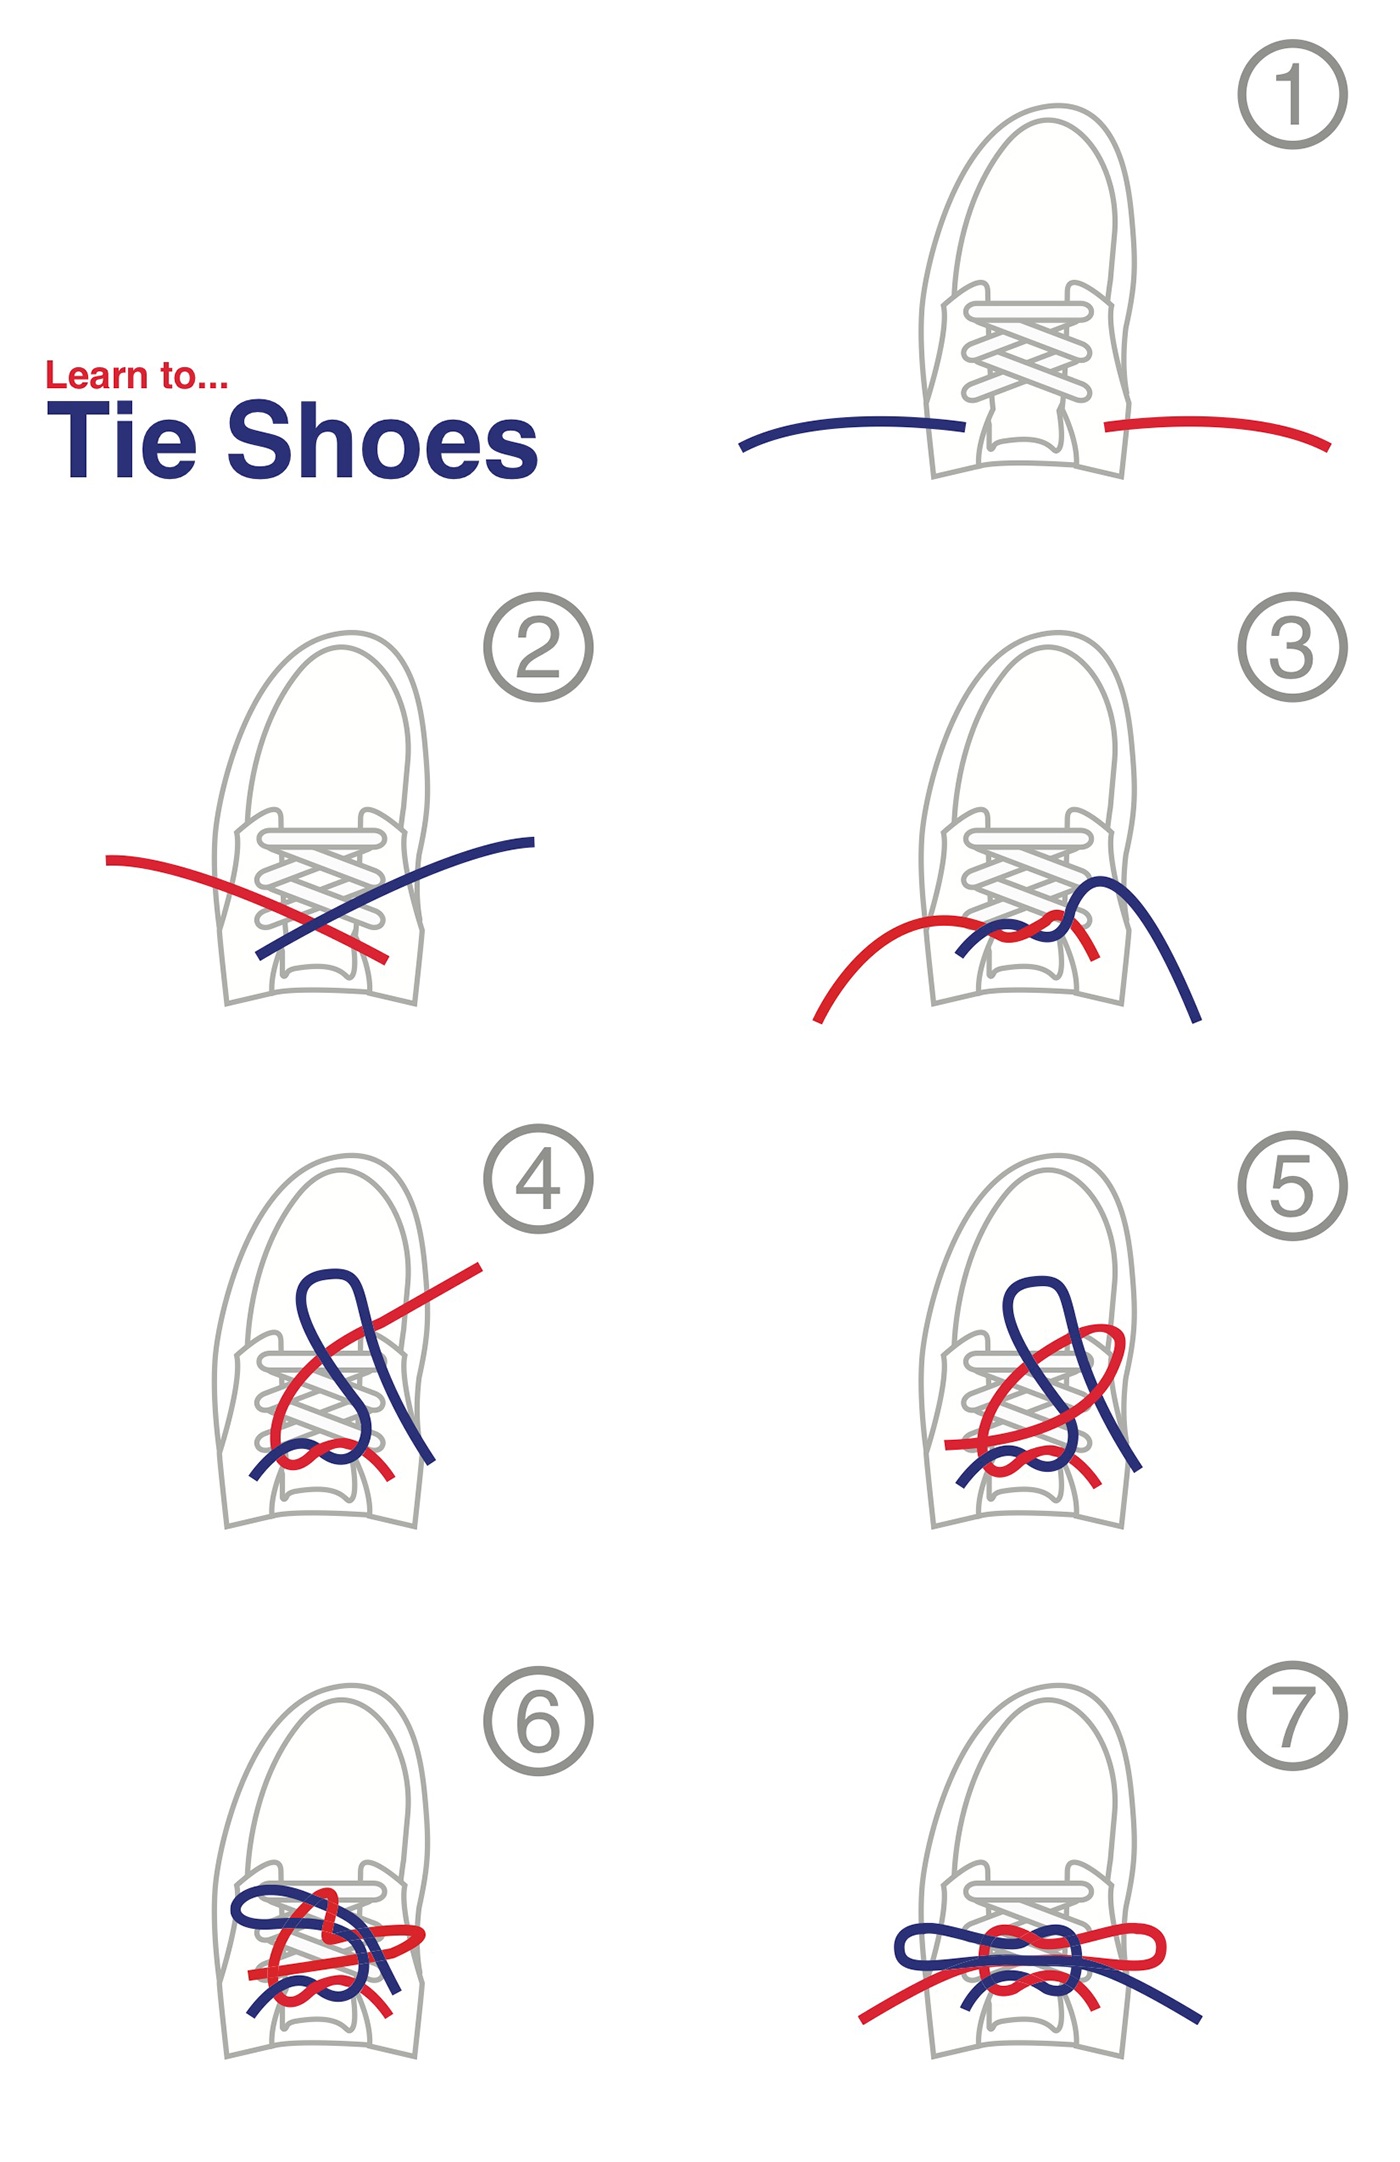 Learn To Tie Shoes on Behance